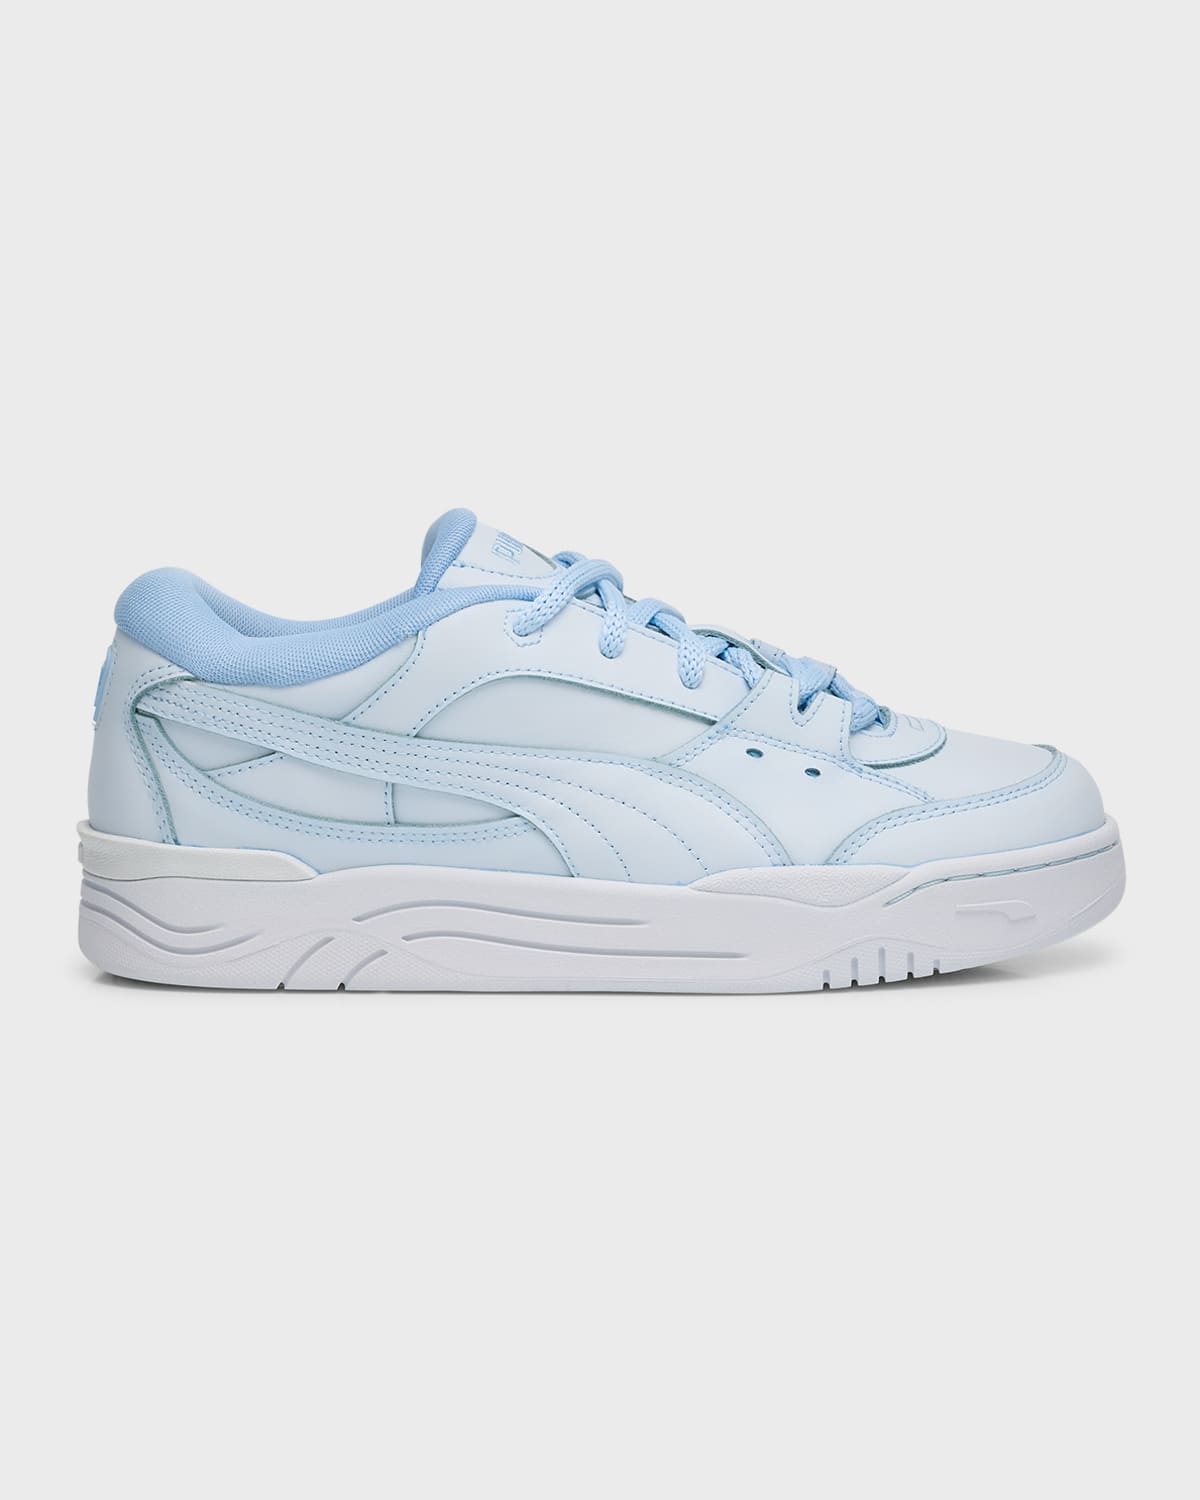 Puma -180 Dip Dyed Lace Up Sneakers In Blue